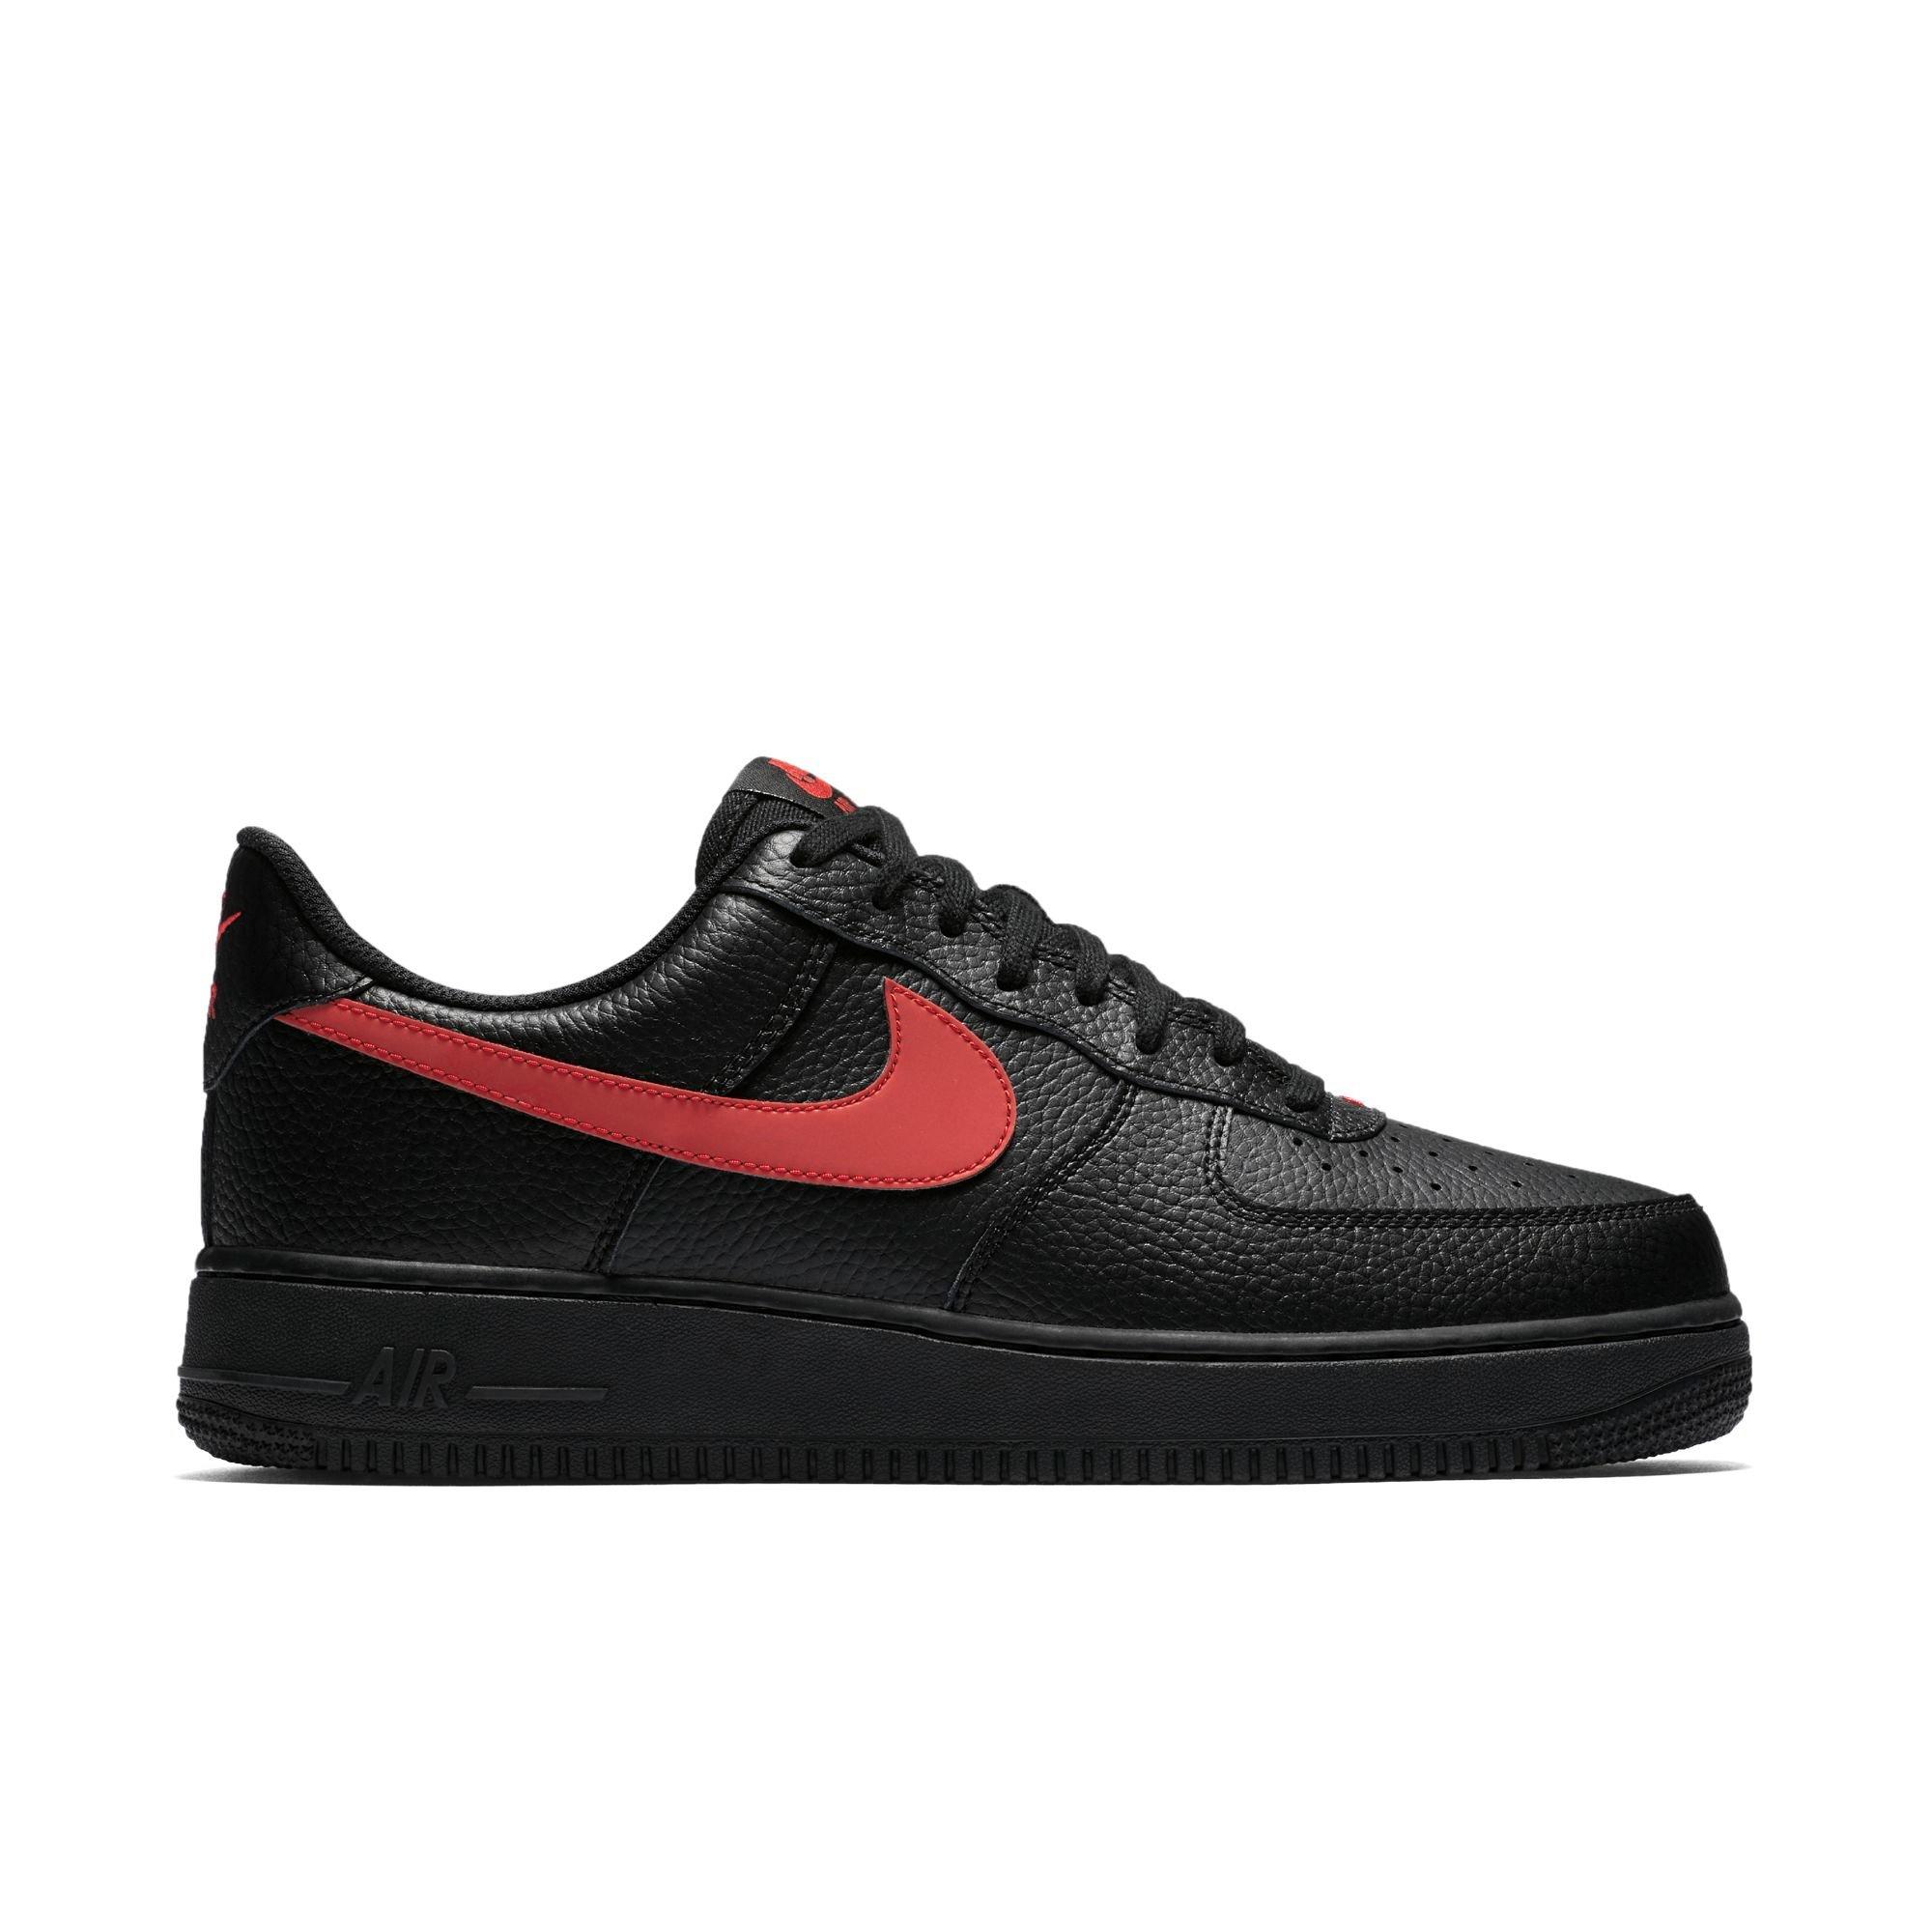 red and black air force 1